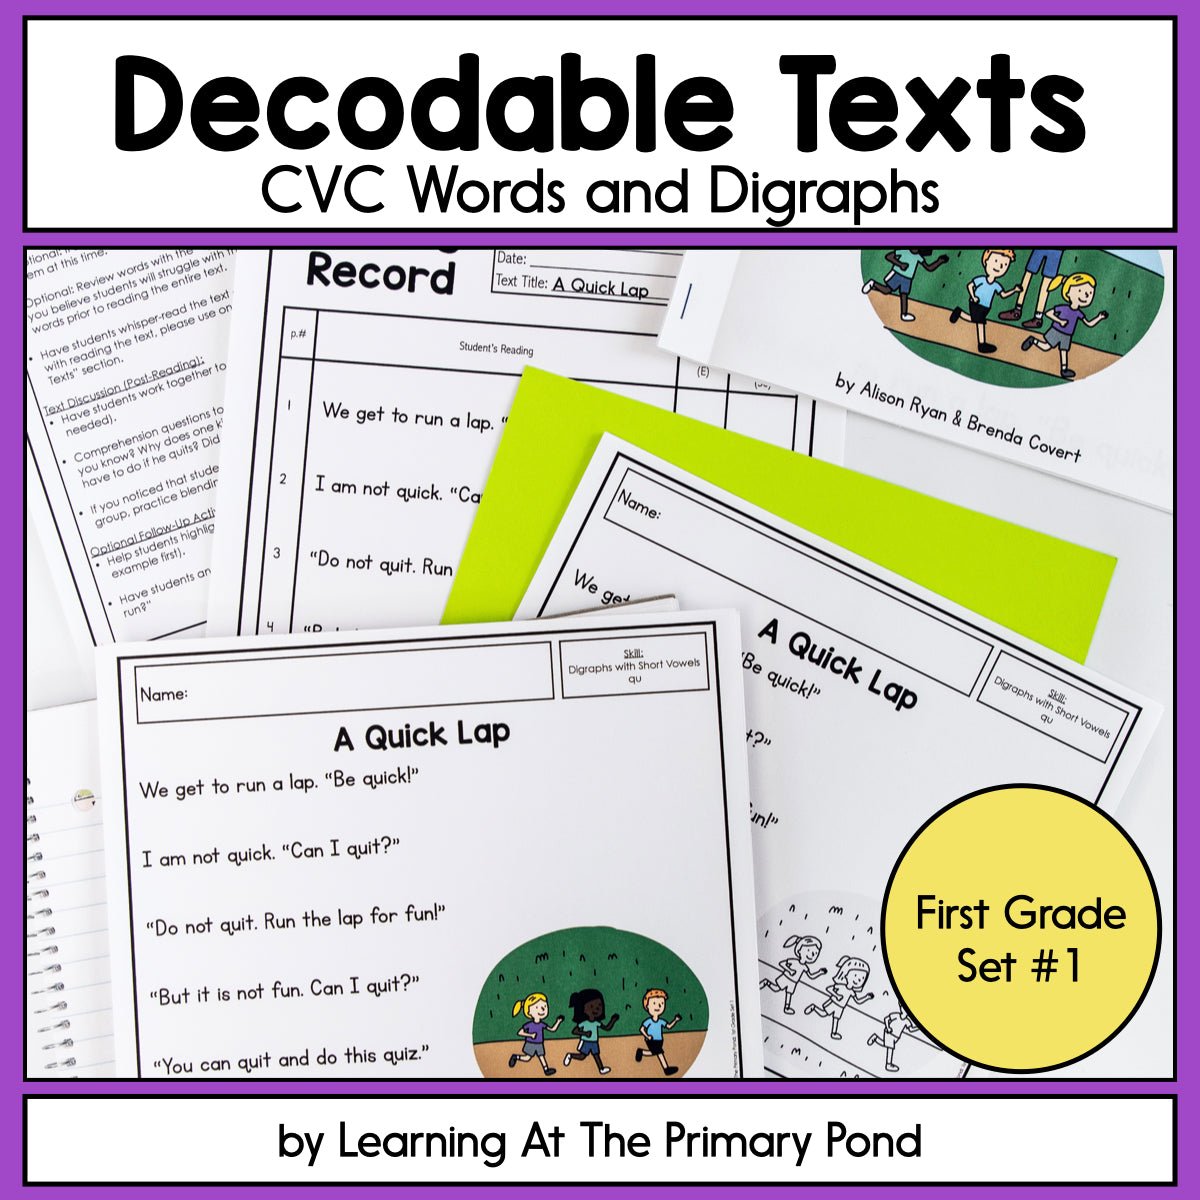 Decodable Readers | CVC Words and Digraphs | First Grade Set 1 | SOR aligned - learning-at-the-primary-pond